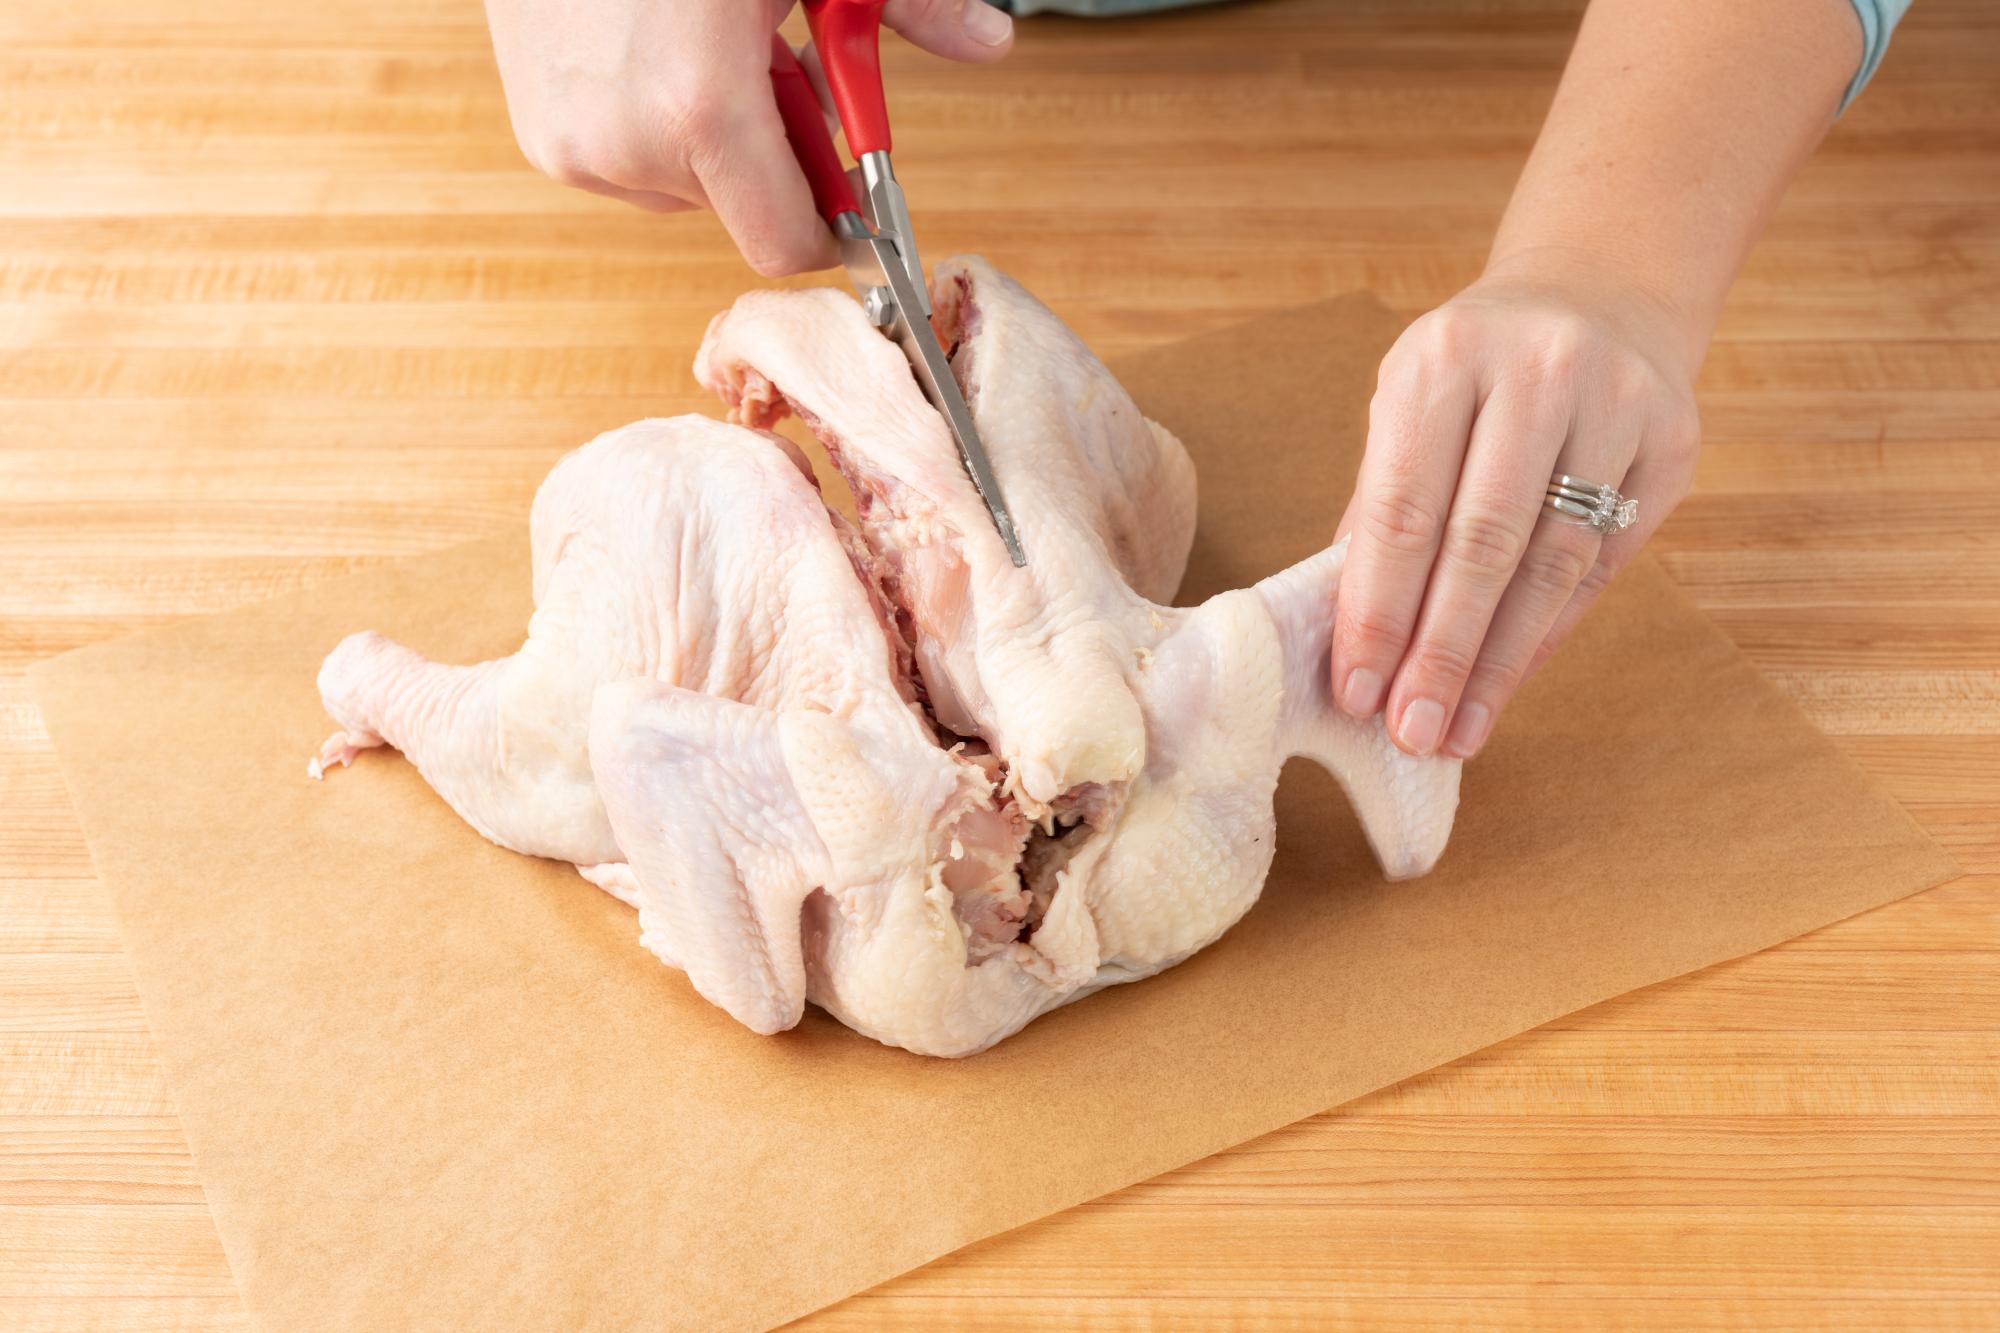 Super Shears being used to prep the chicken.